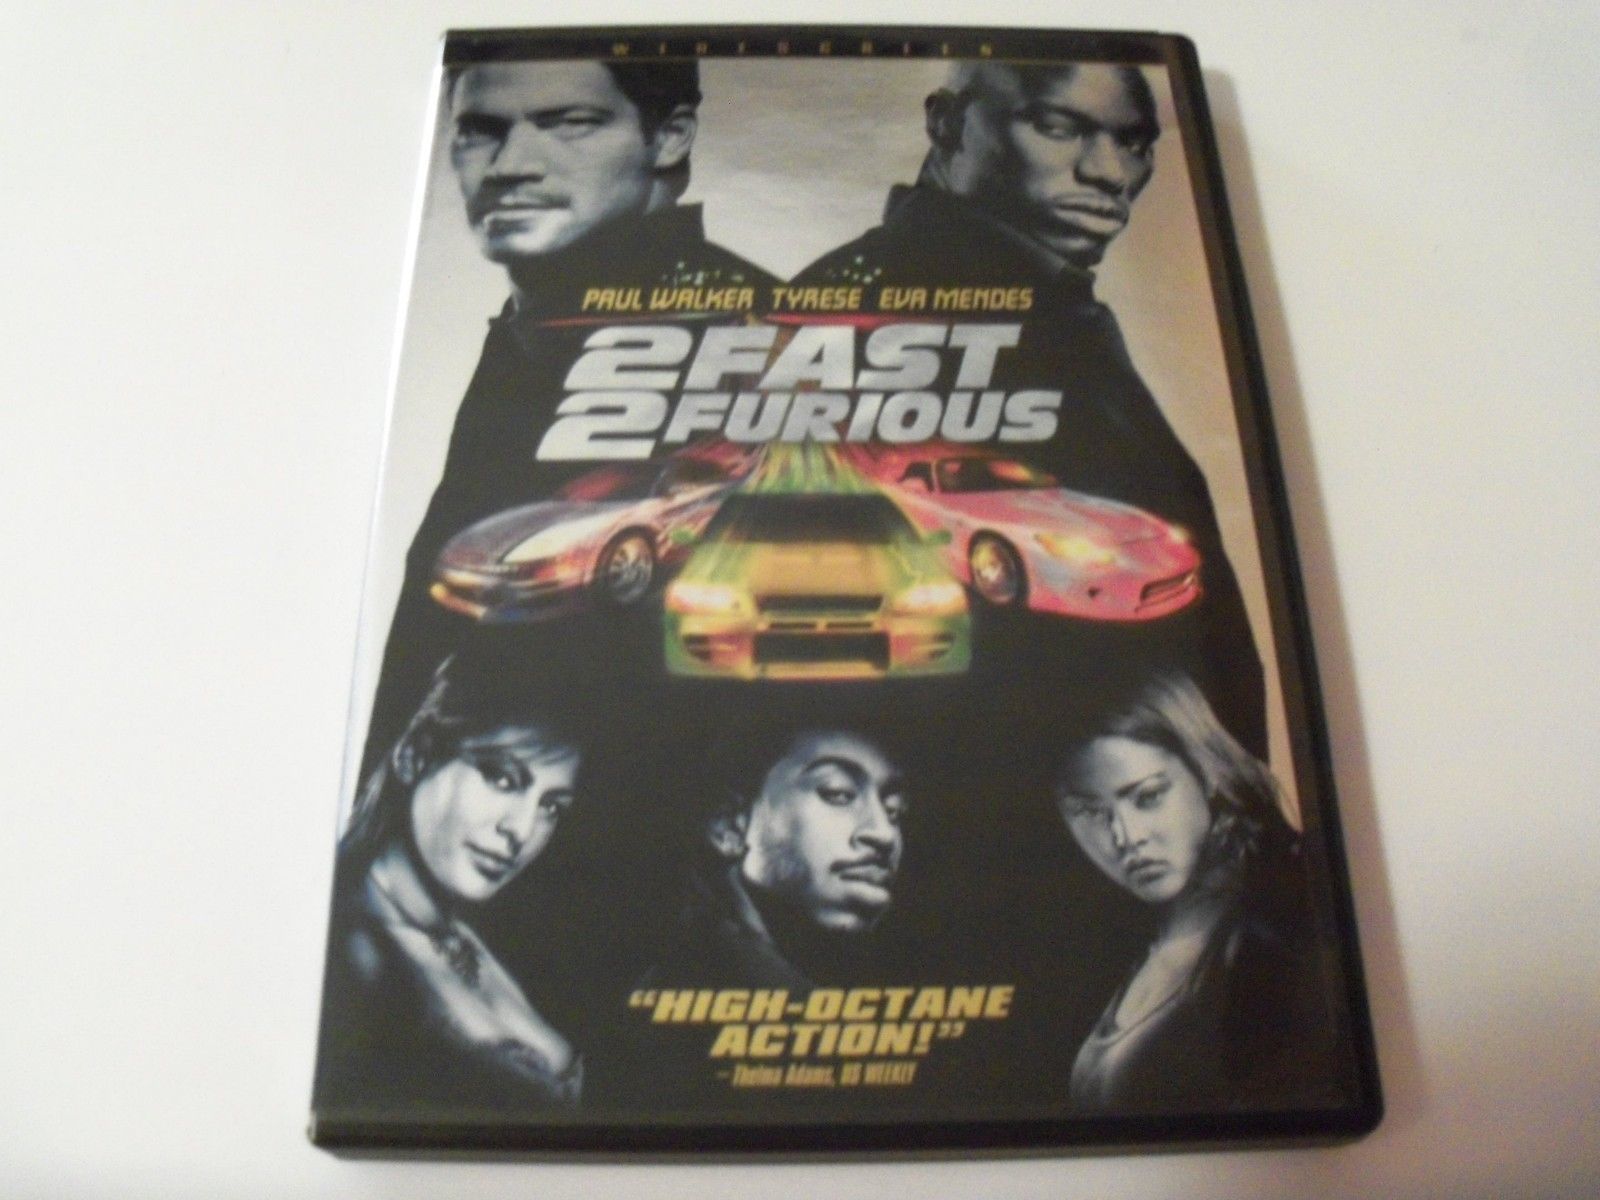 2 Fast 2 Furious Dvd Widescreen Paul Walker Tyrese Gibson Eva Mendes Cole Hauser Dvds And Blu 